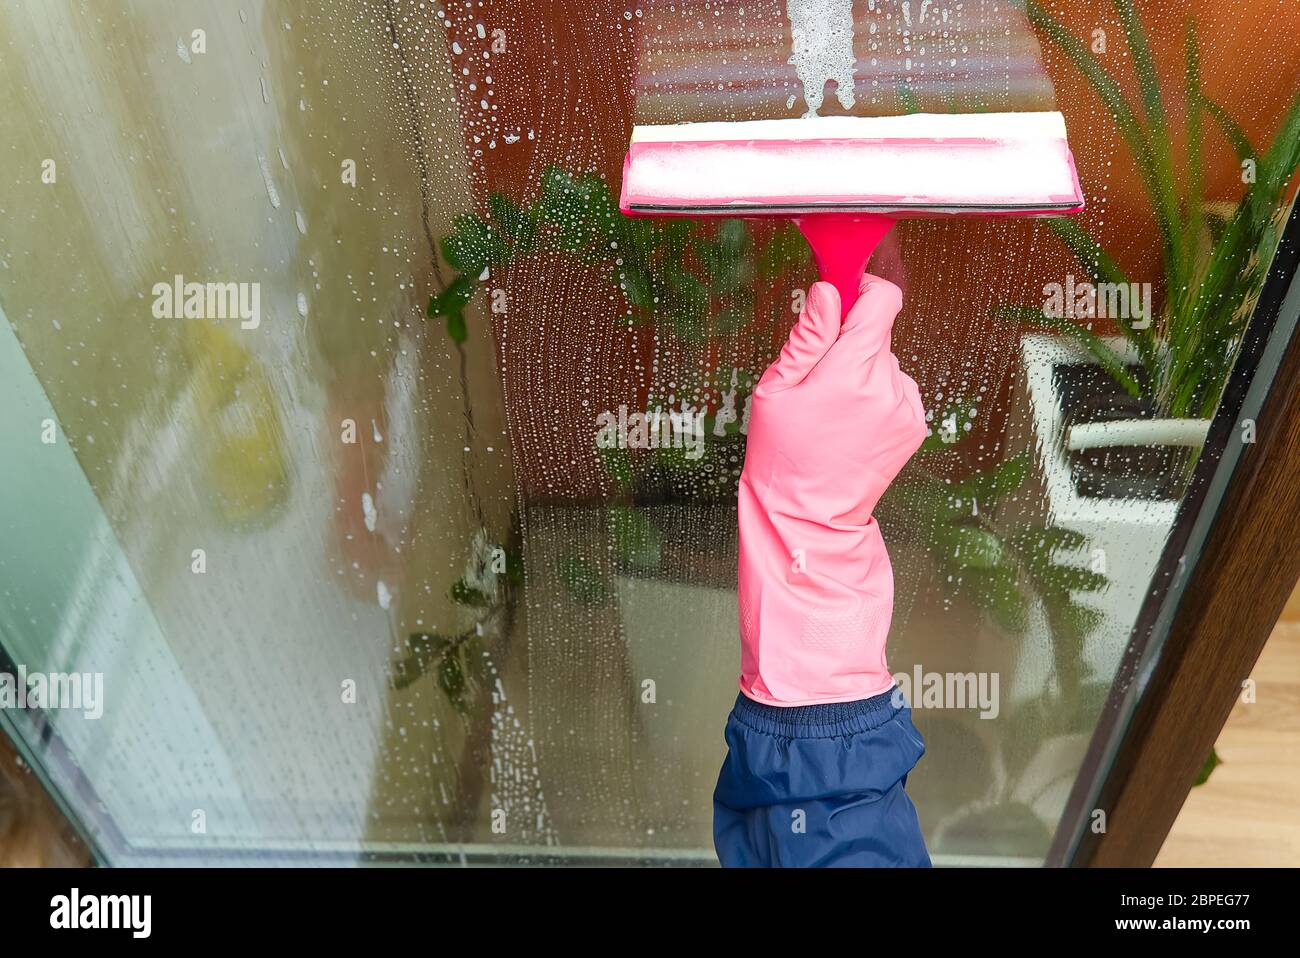 window cleaning. A woman in pink rubber gloves washes a window in a house.  Happy Woman In Gloves Cleaning Window. Concept for home cleaning services  Stock Photo - Alamy